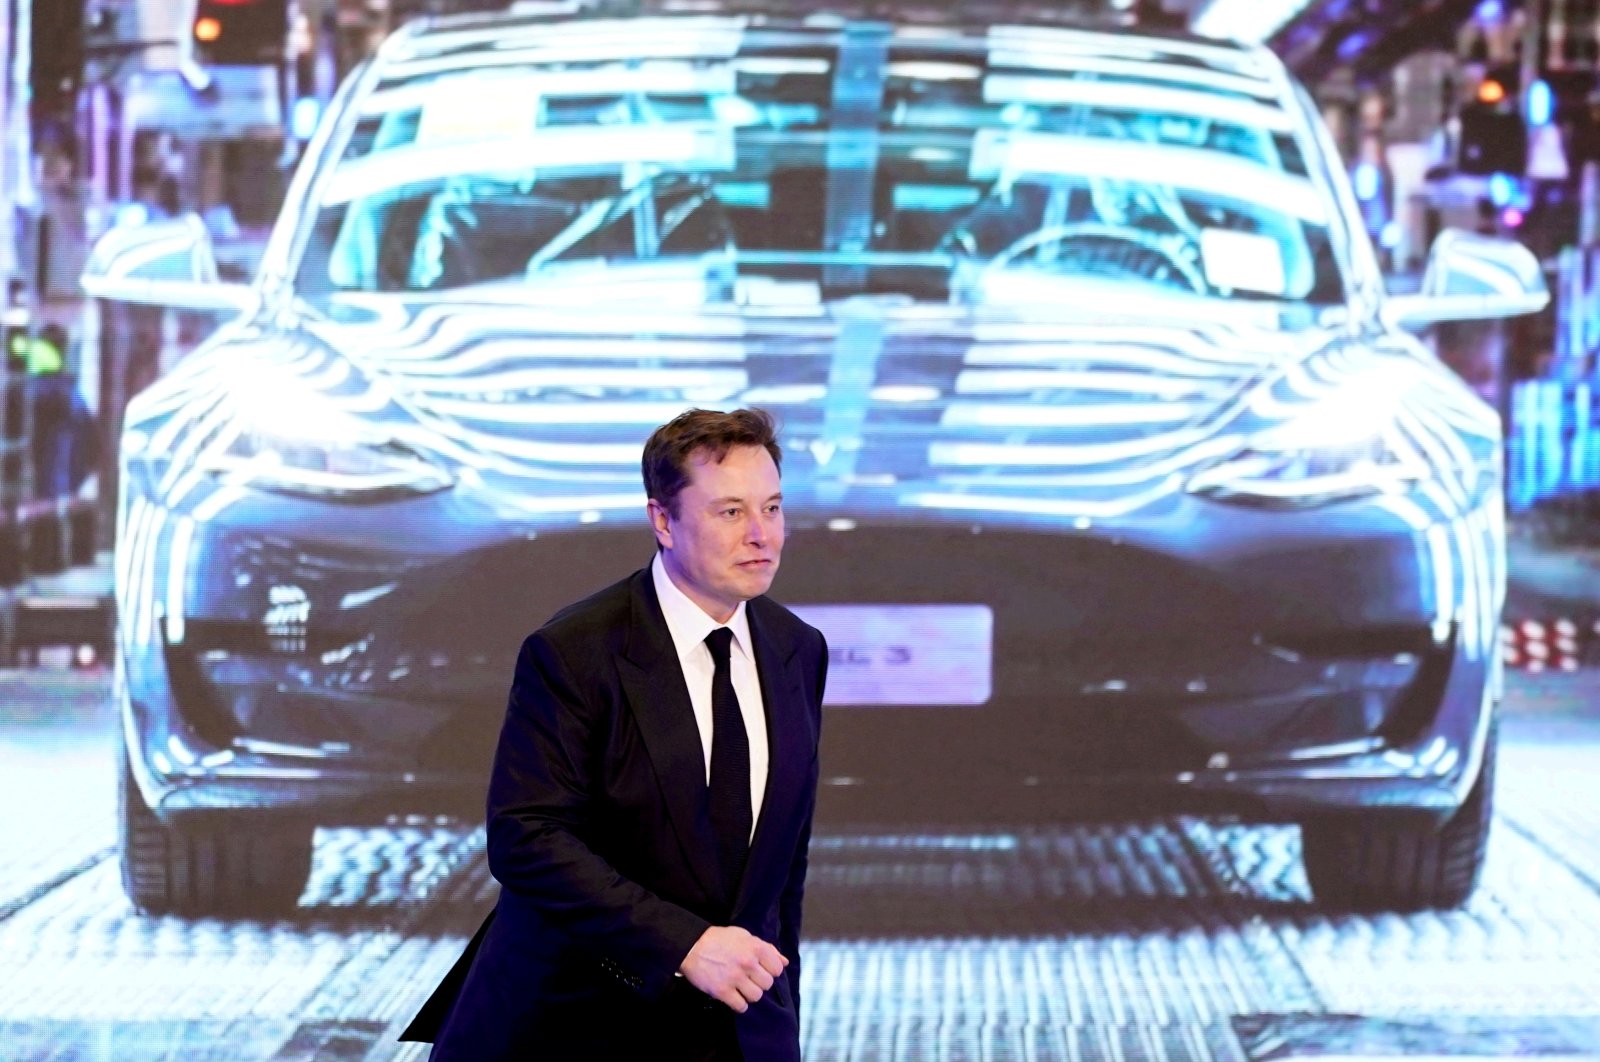 Tesla Inc CEO Elon Musk walks next to a screen showing an image of Tesla Model 3 car during an opening ceremony for Tesla China-made Model Y program in Shanghai, China, Jan. 7, 2020. (Reuters Photo)